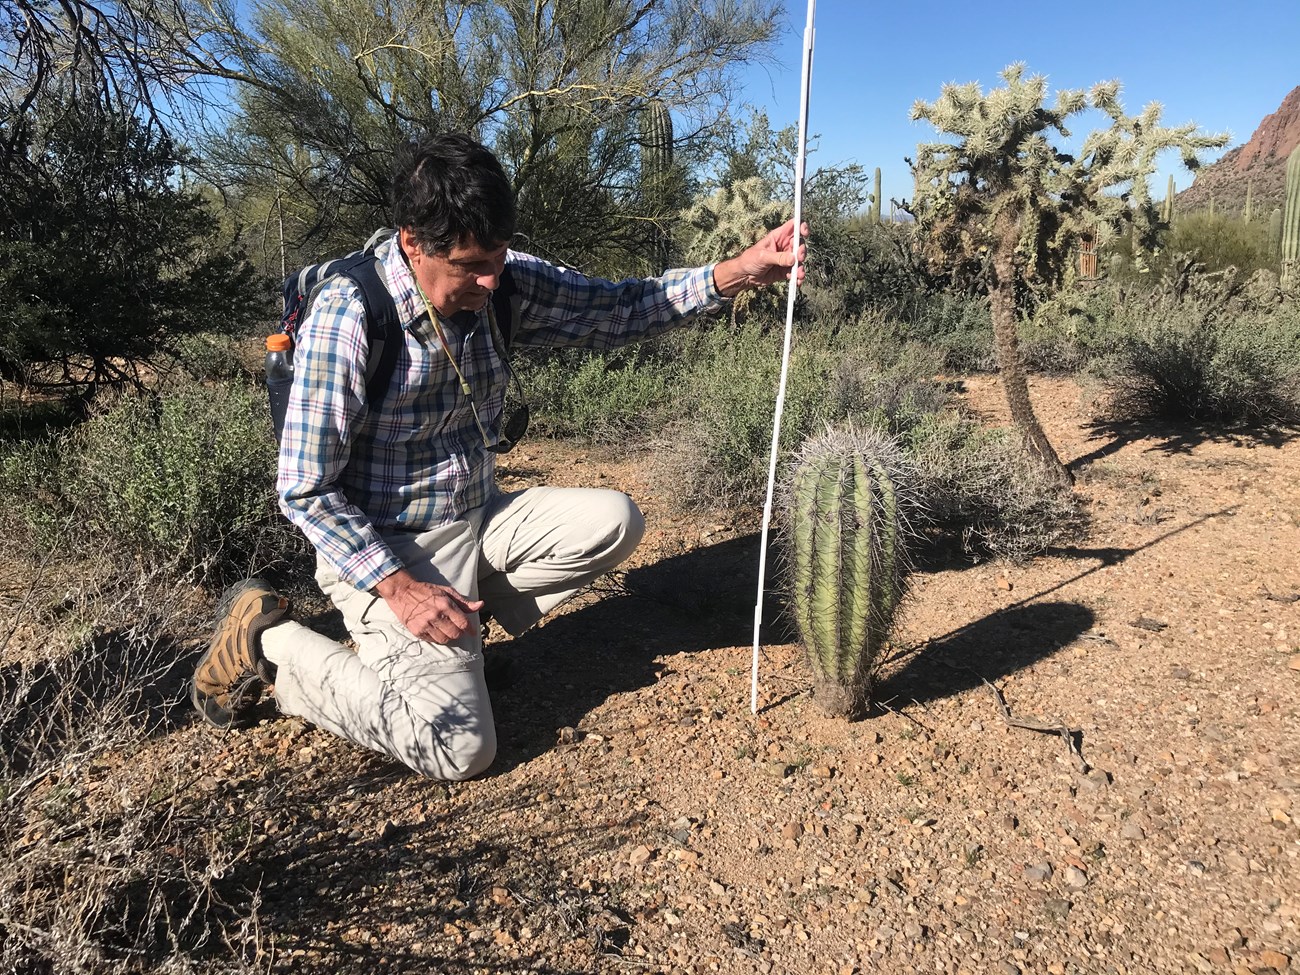 A man on his knees measuring the height of a short saguaro.